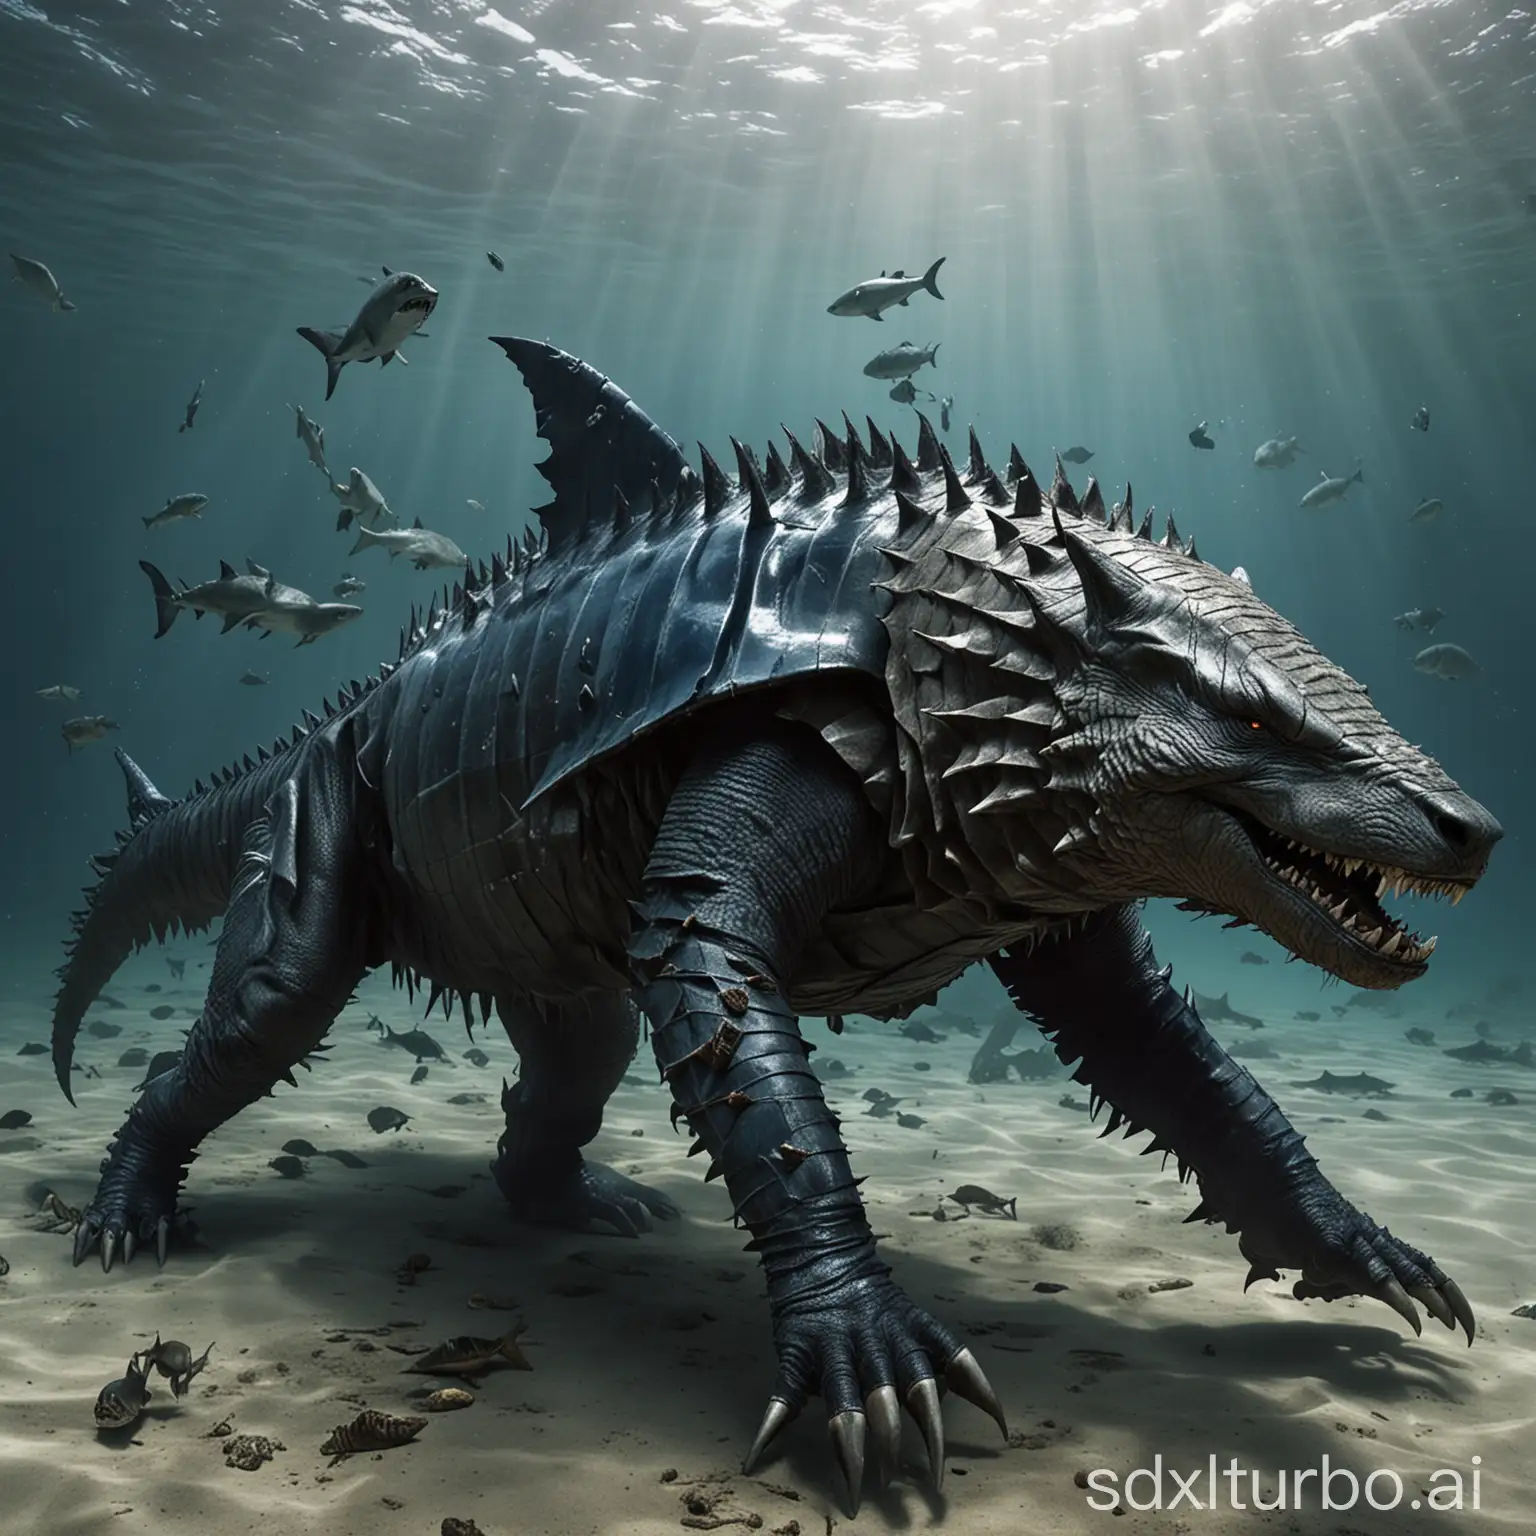 Elephant-sized, amphibious, and one of the few wolves that can fight underwater. They are extremely defensive, wearing smooth crocodile leather armor and sharp dark blue fins growing on the sides of their bodies. There is also a row of shark fins on the back that resemble the back of a shark, which are connected in a line that extends from the wolf's head to the wolf's tail.